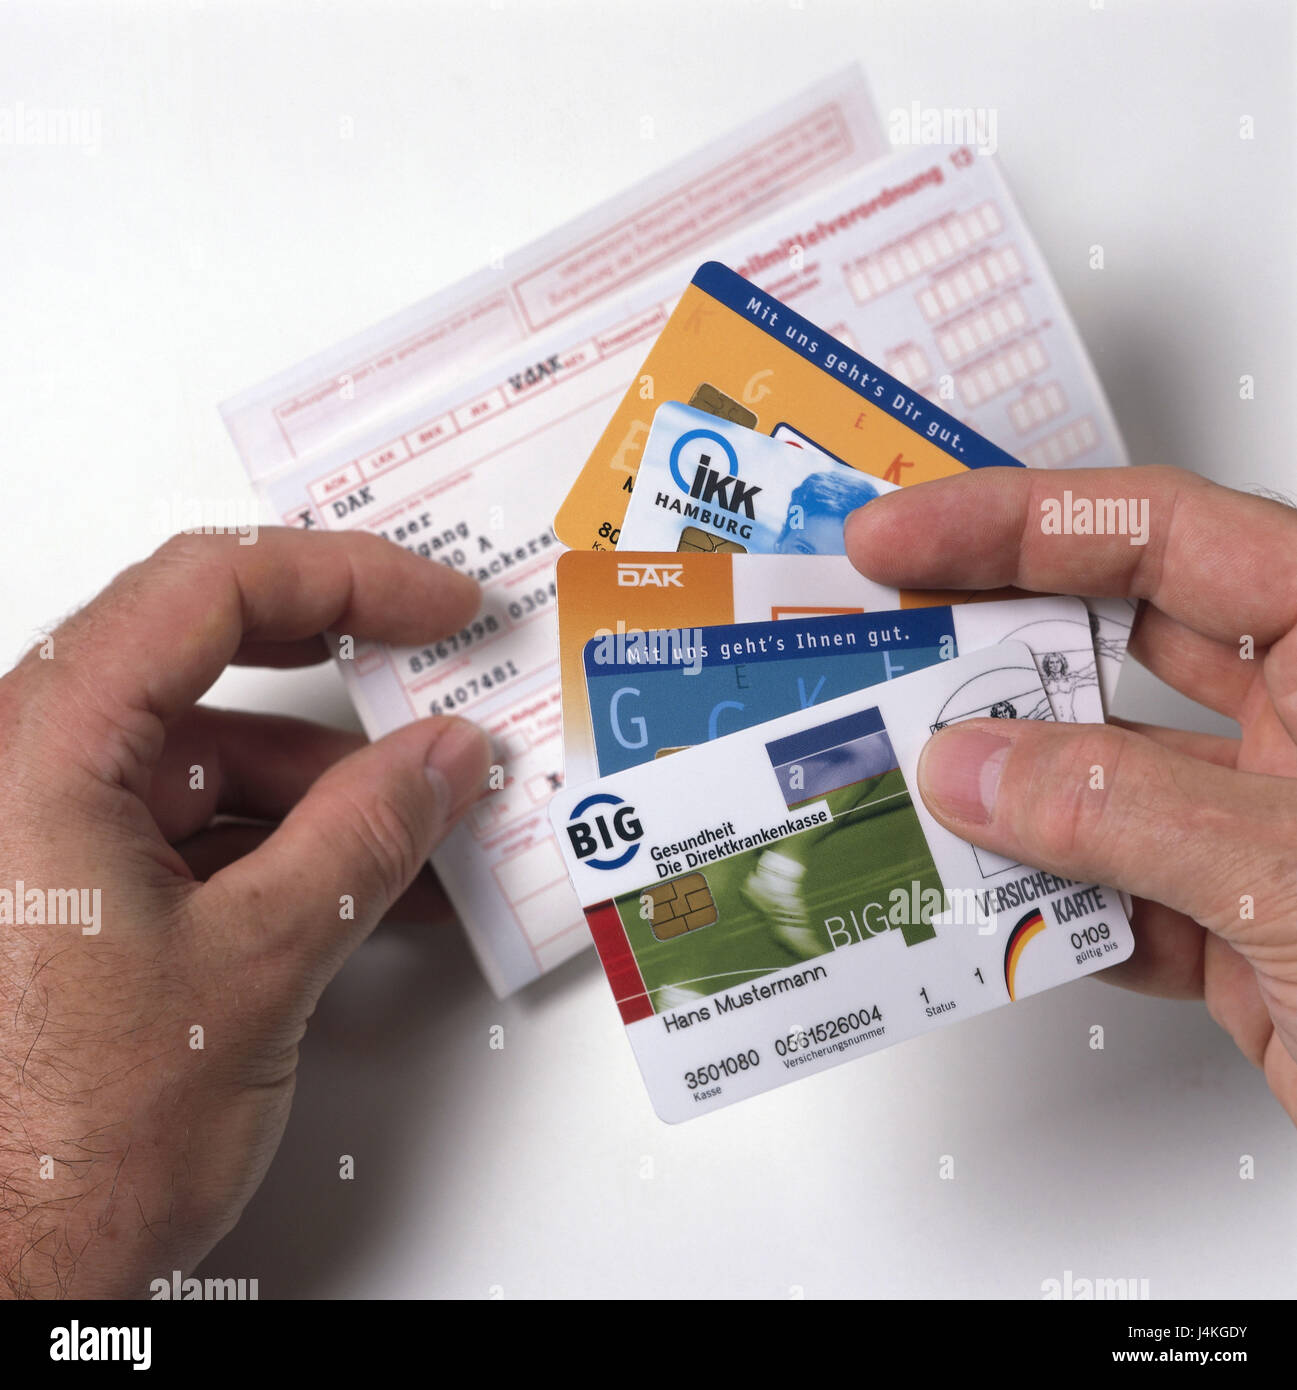 Man, detail, hands, recipe light, insurance cards health insurance, health insurance cards, cards, chip cards, health insurances, health insurance, ill-insured, privately, private-insured, recipe, drug order, recipe fee, public health, disease, expenses, liable to prescription, man's hands Stock Photo